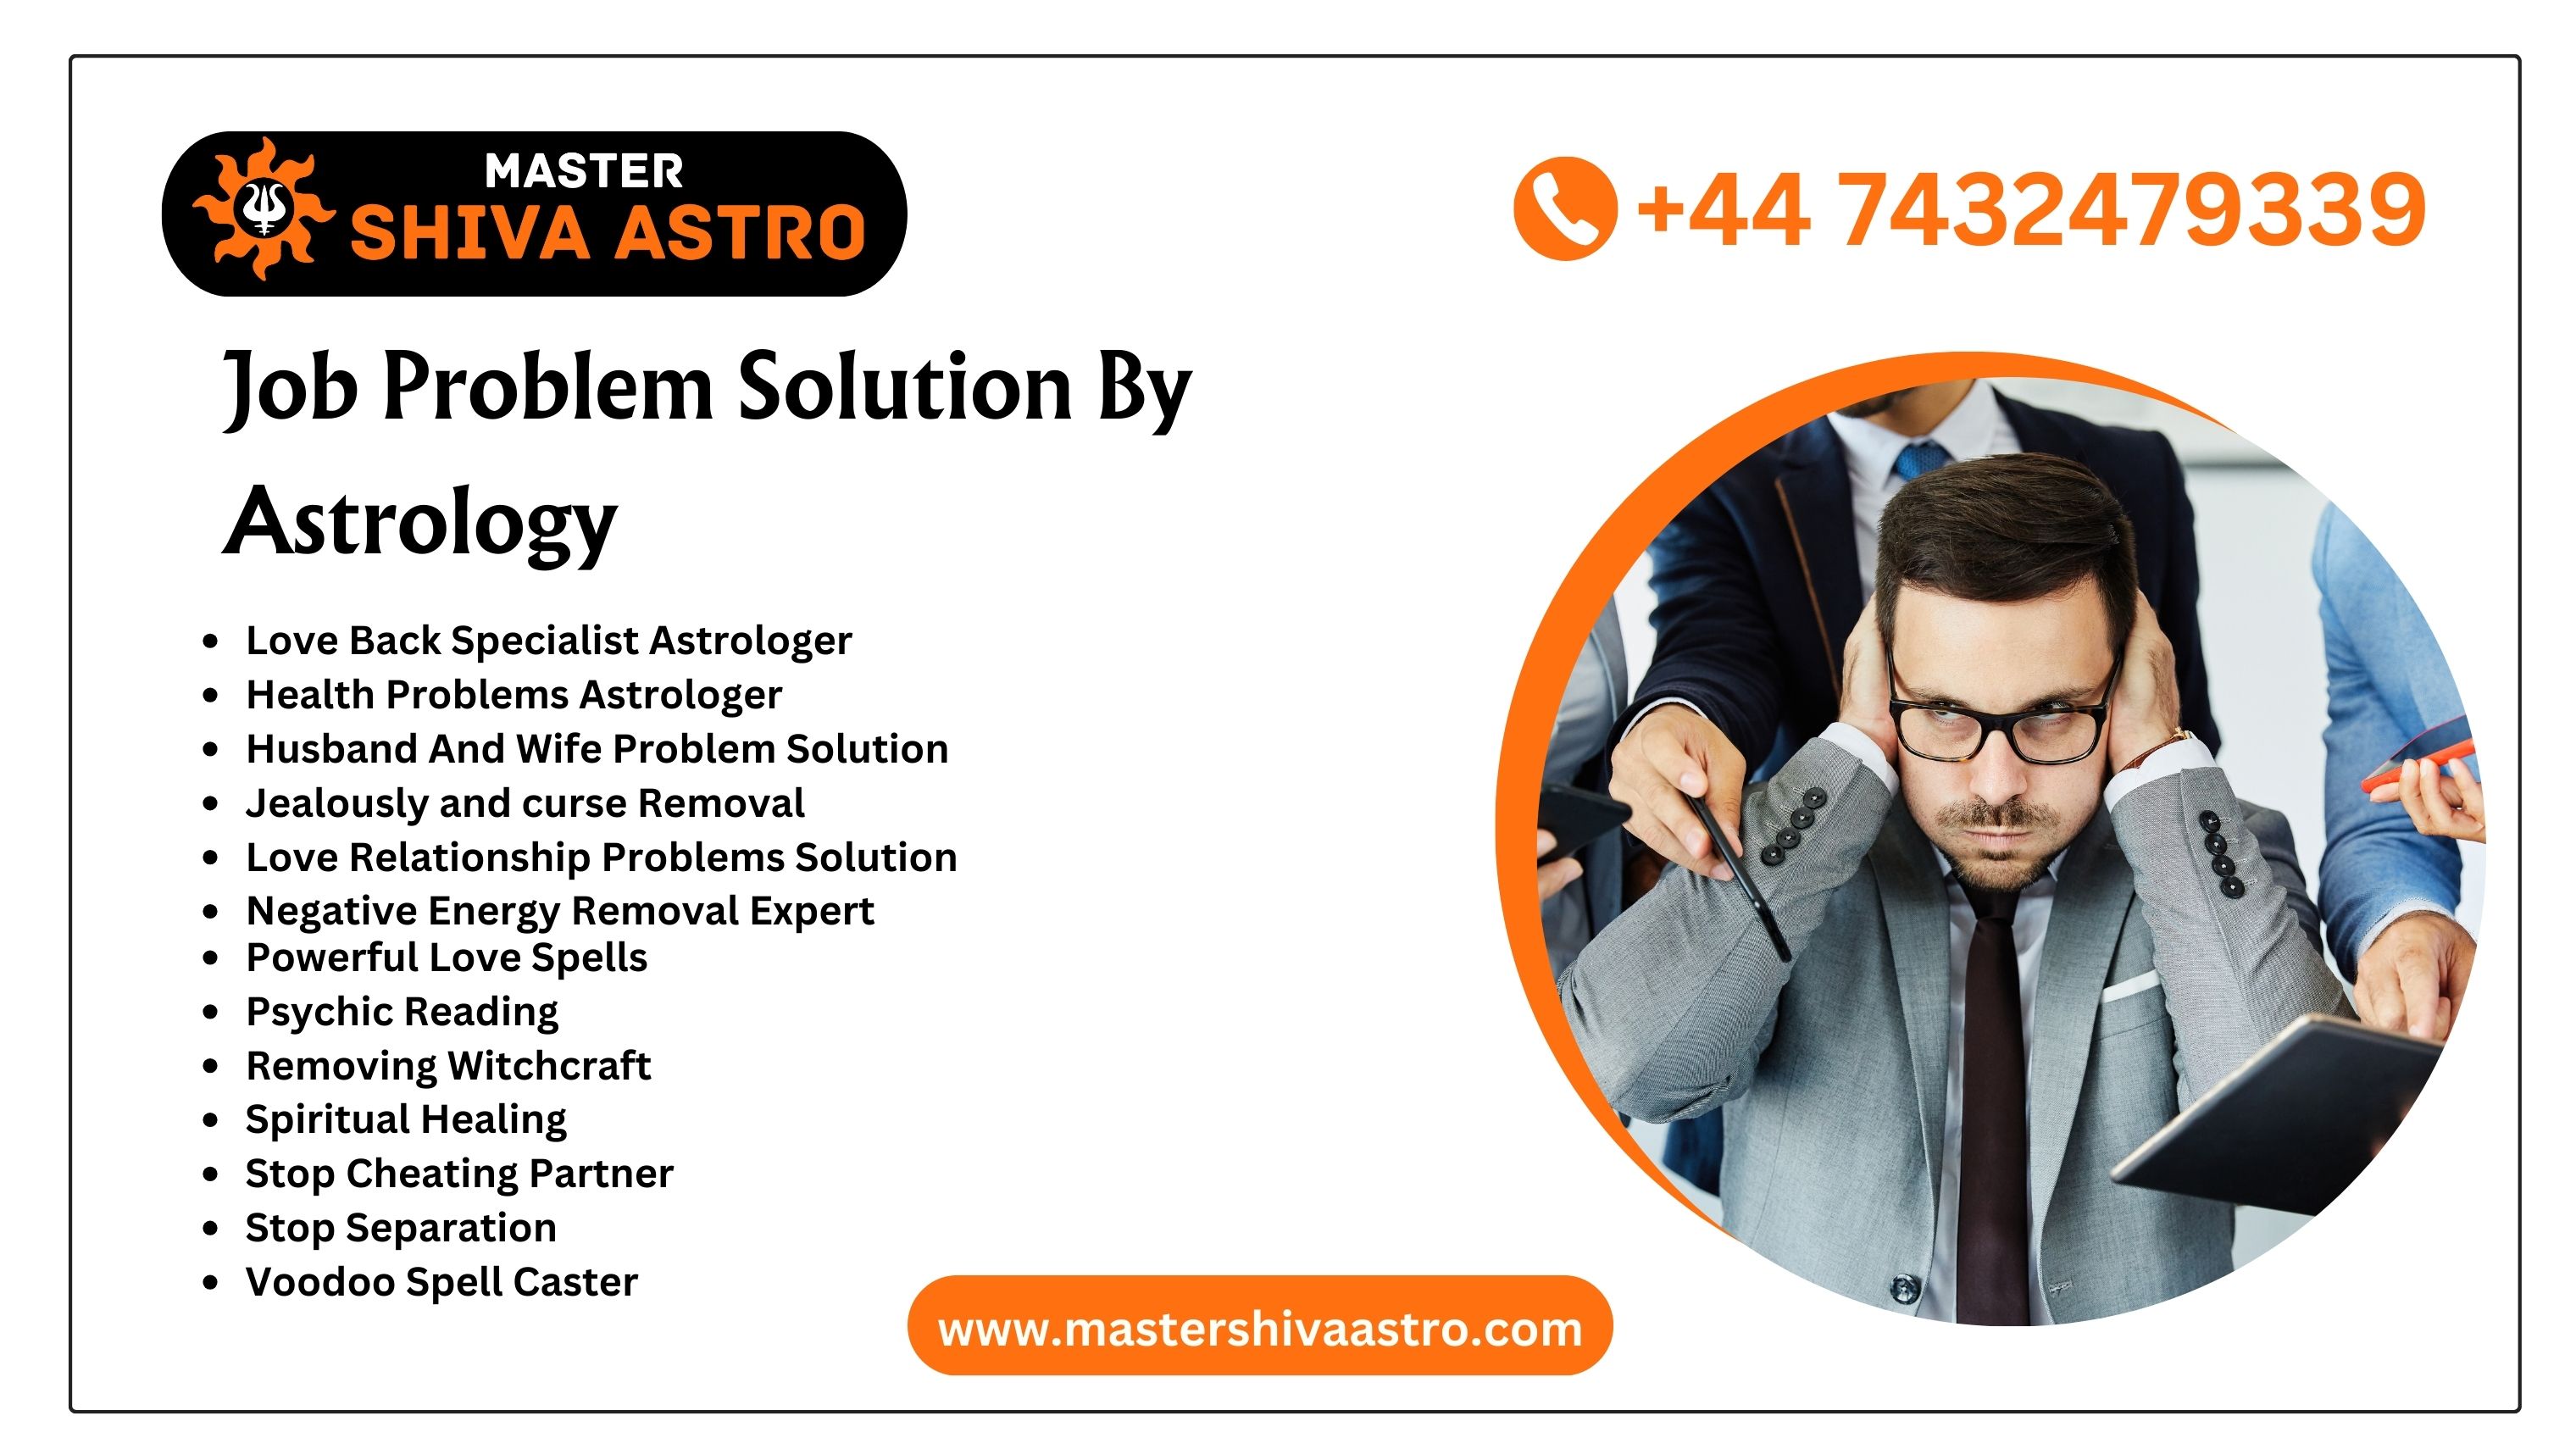 Job Problem Solution By Astrology